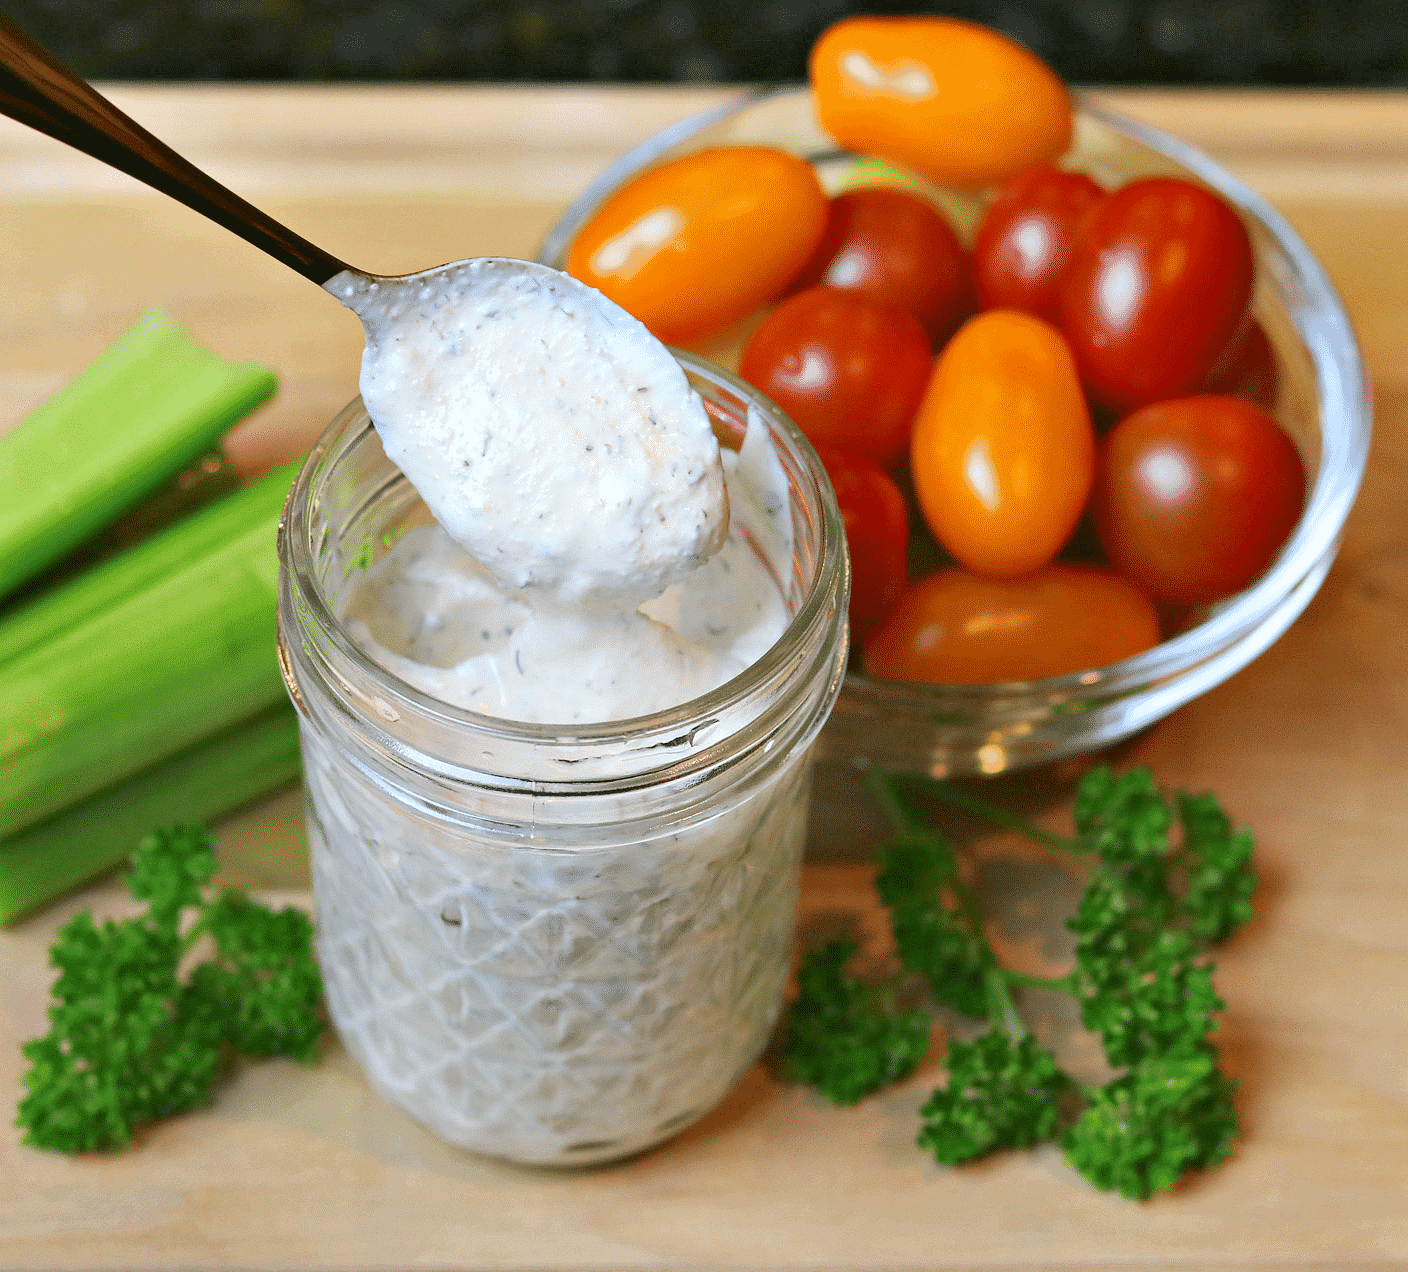 ranch dressing in a jar with vegetables